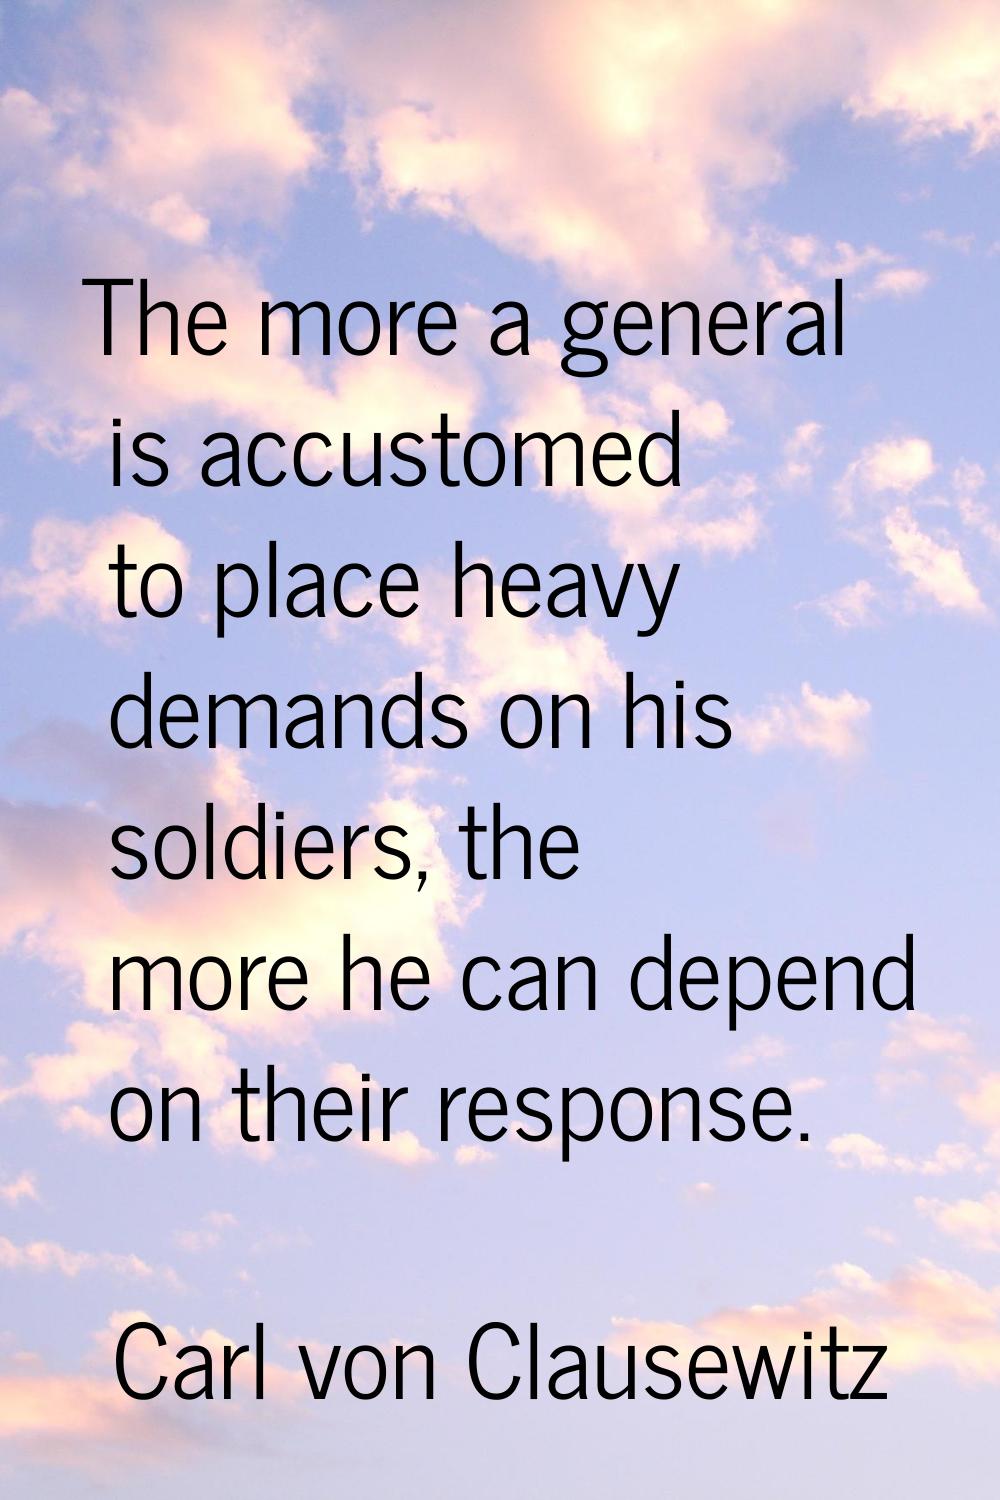 The more a general is accustomed to place heavy demands on his soldiers, the more he can depend on 